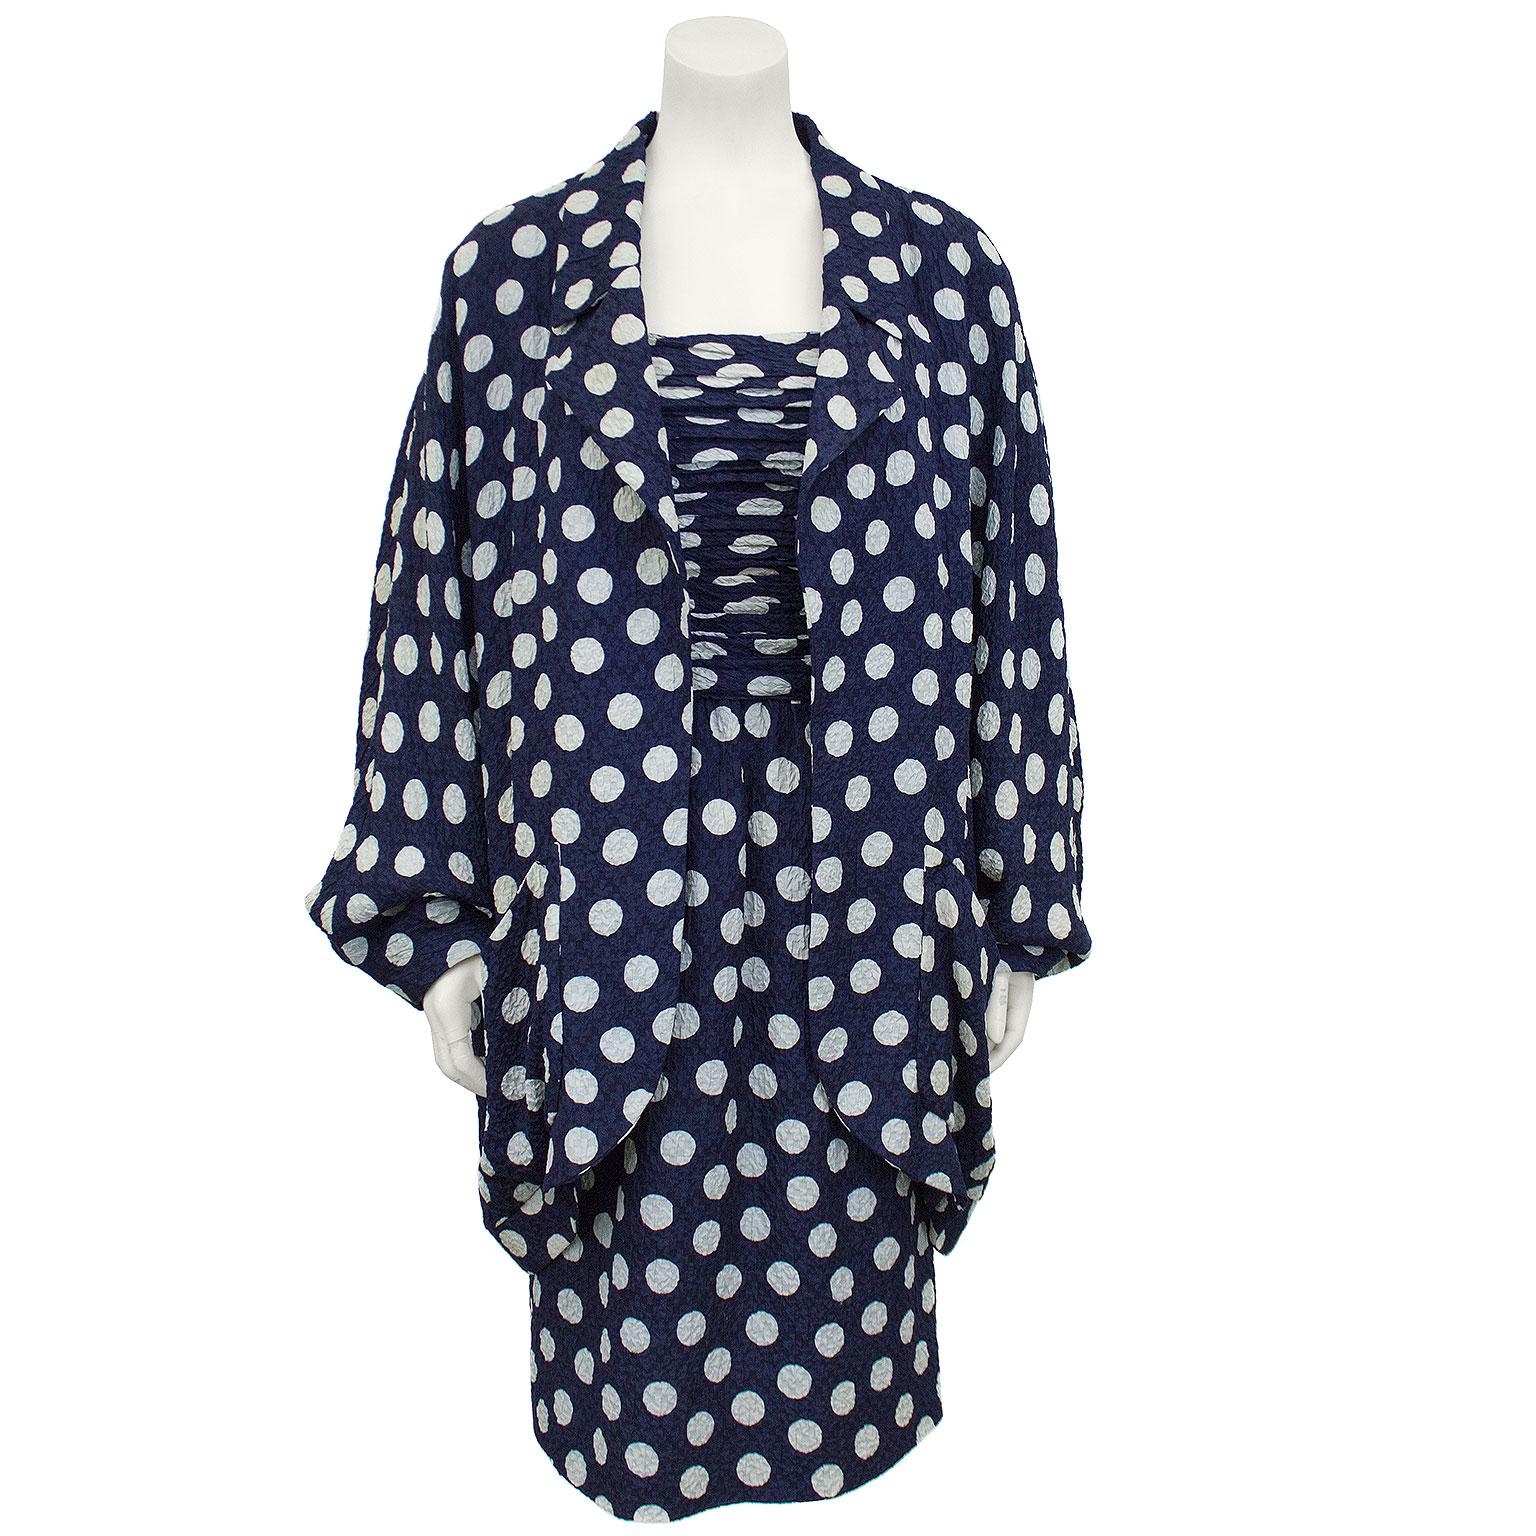 Beautiful 1980s Chanel silk navy polka dotted strapless dress and jacket. The busts of the dress is pleated to the natural waist and the skirt falls to mid calf length. Zipper up the back. The voluminous jacket has a shirt lapel and poet style